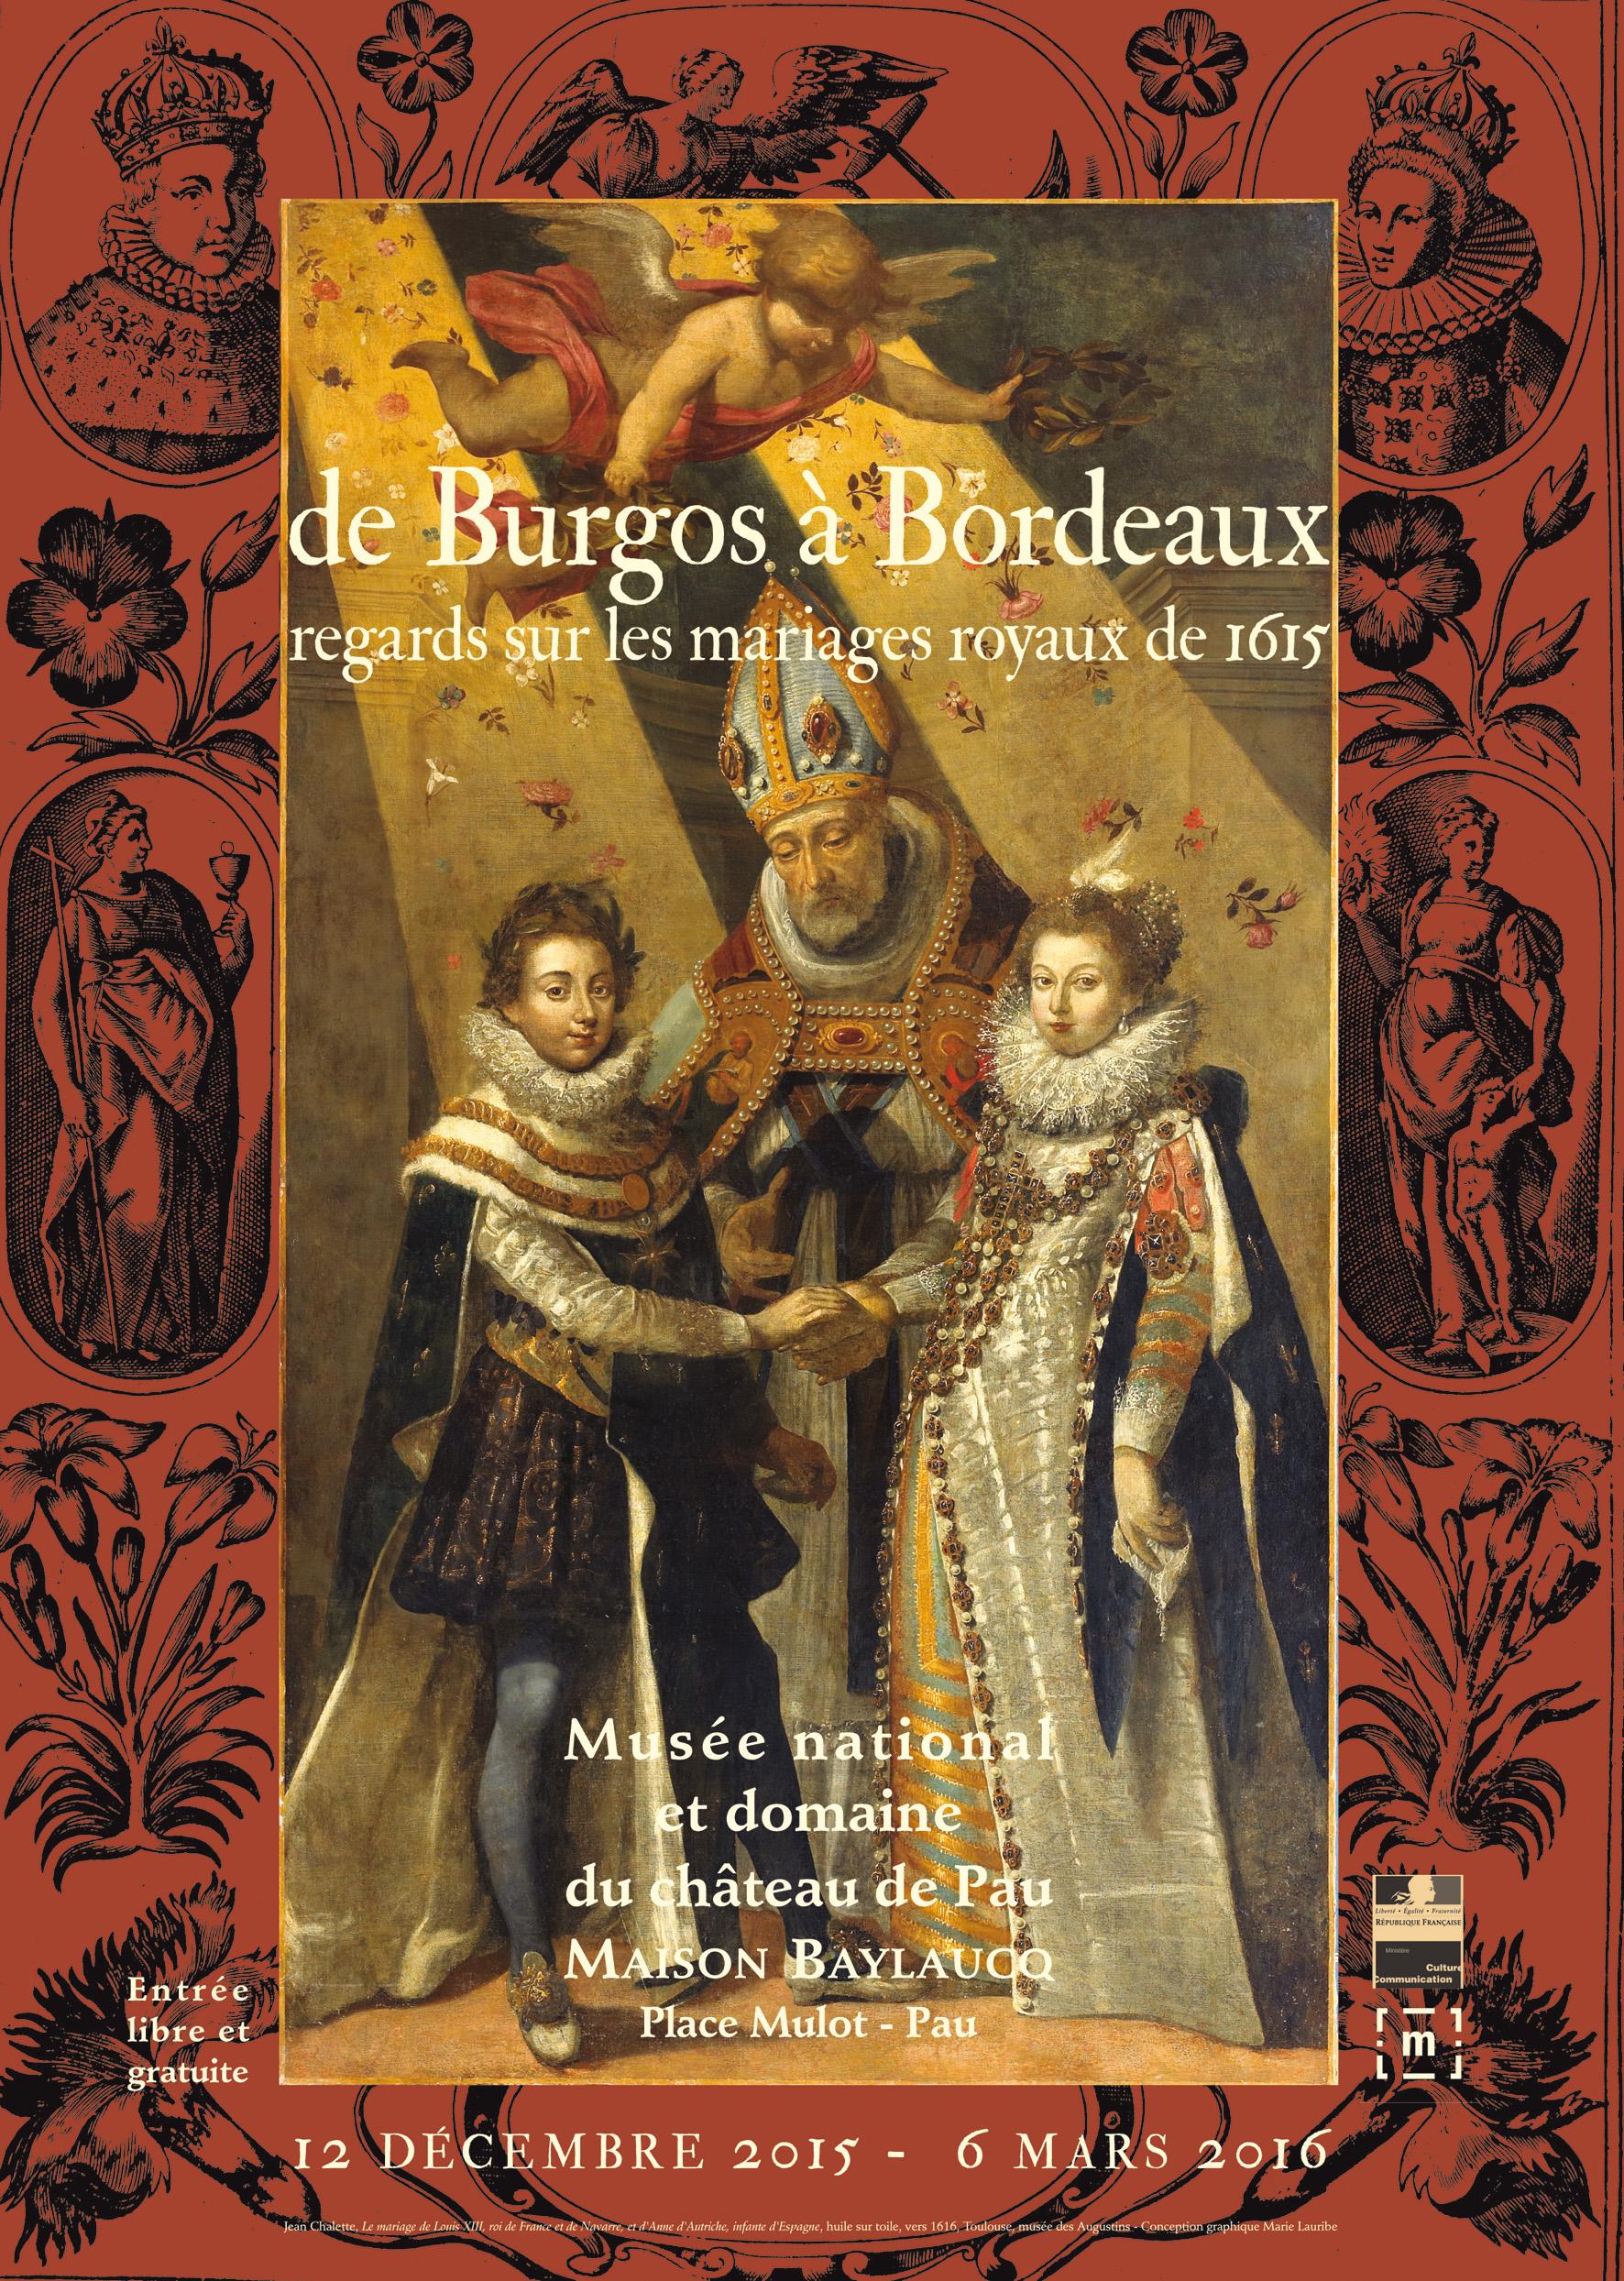 Media Name: affiche_exposition_mariages_royaux_1615.jpg